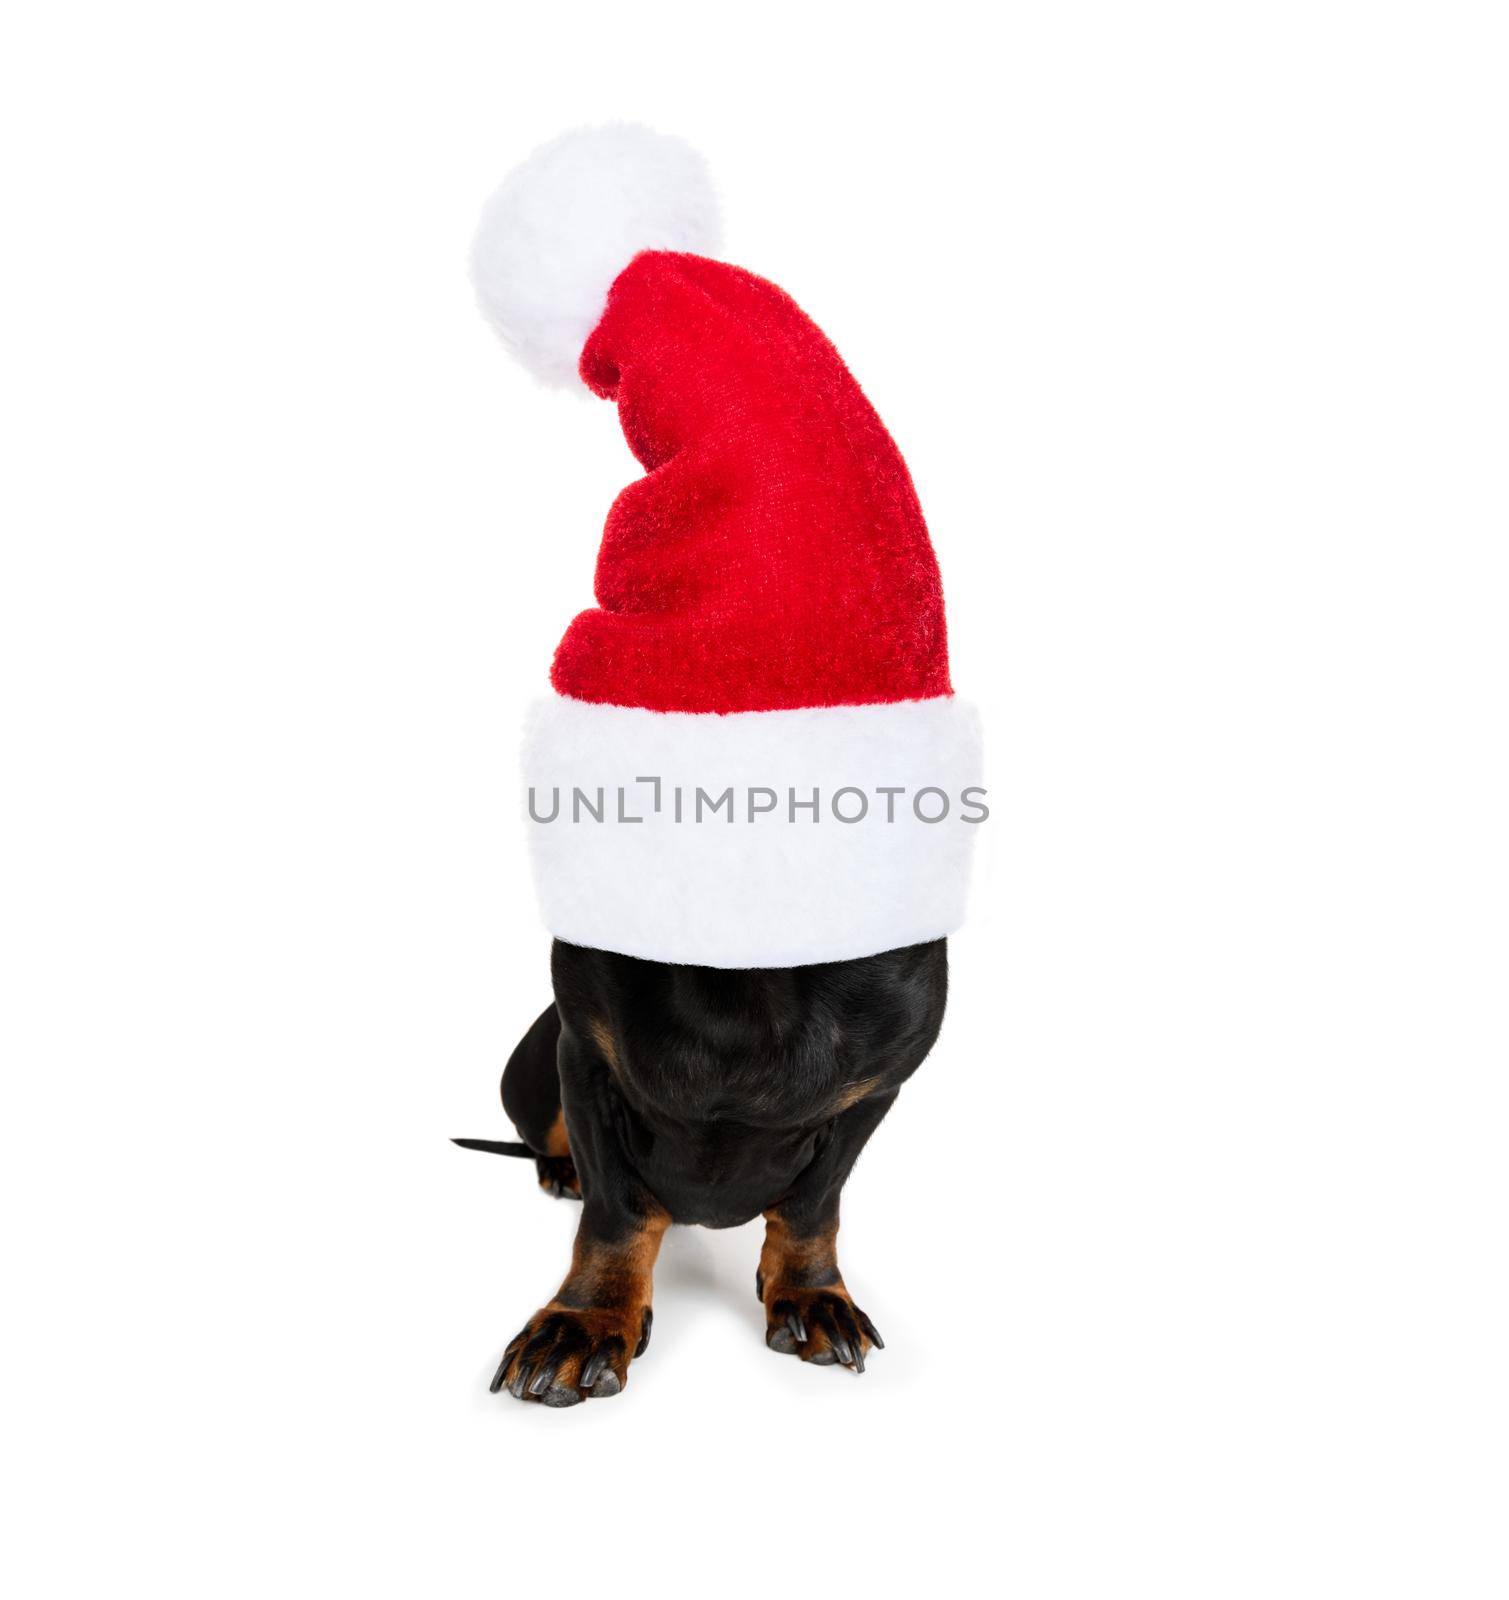 christmas santa claus dachshund sausage dog as a holiday season surprise out of a gift or present box  with red hat , isolated on white